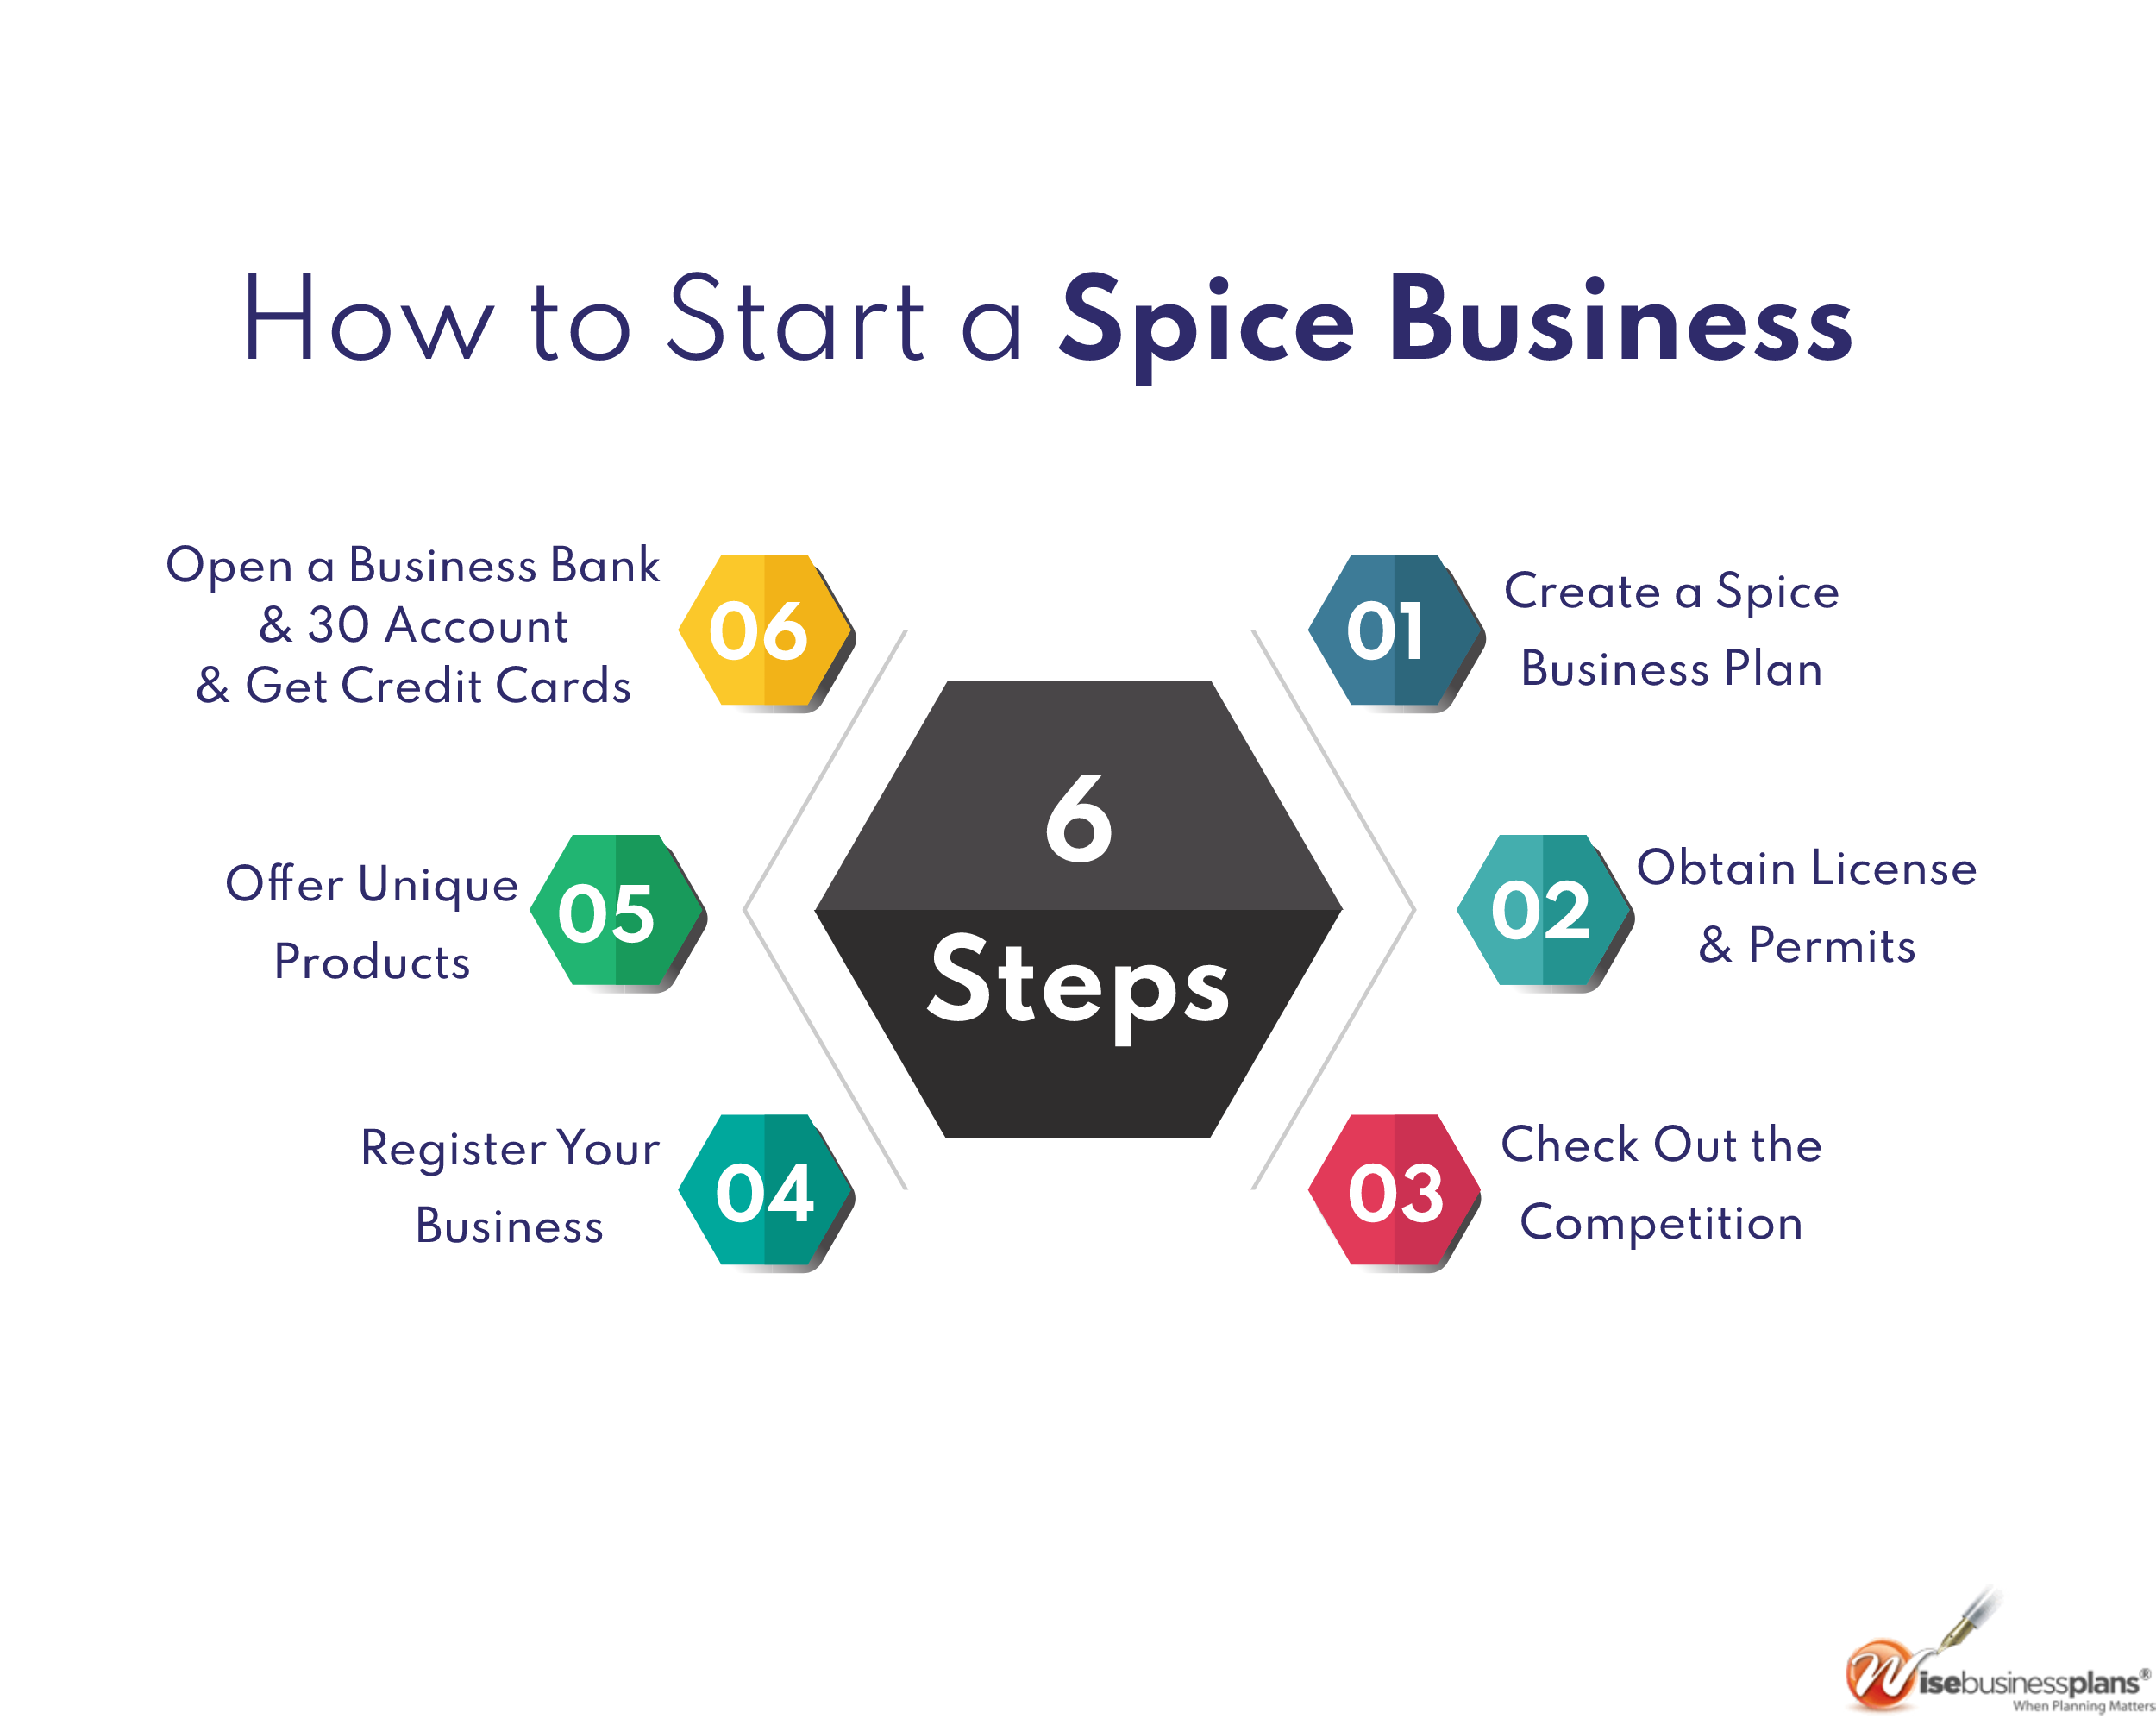 How to start a spice business